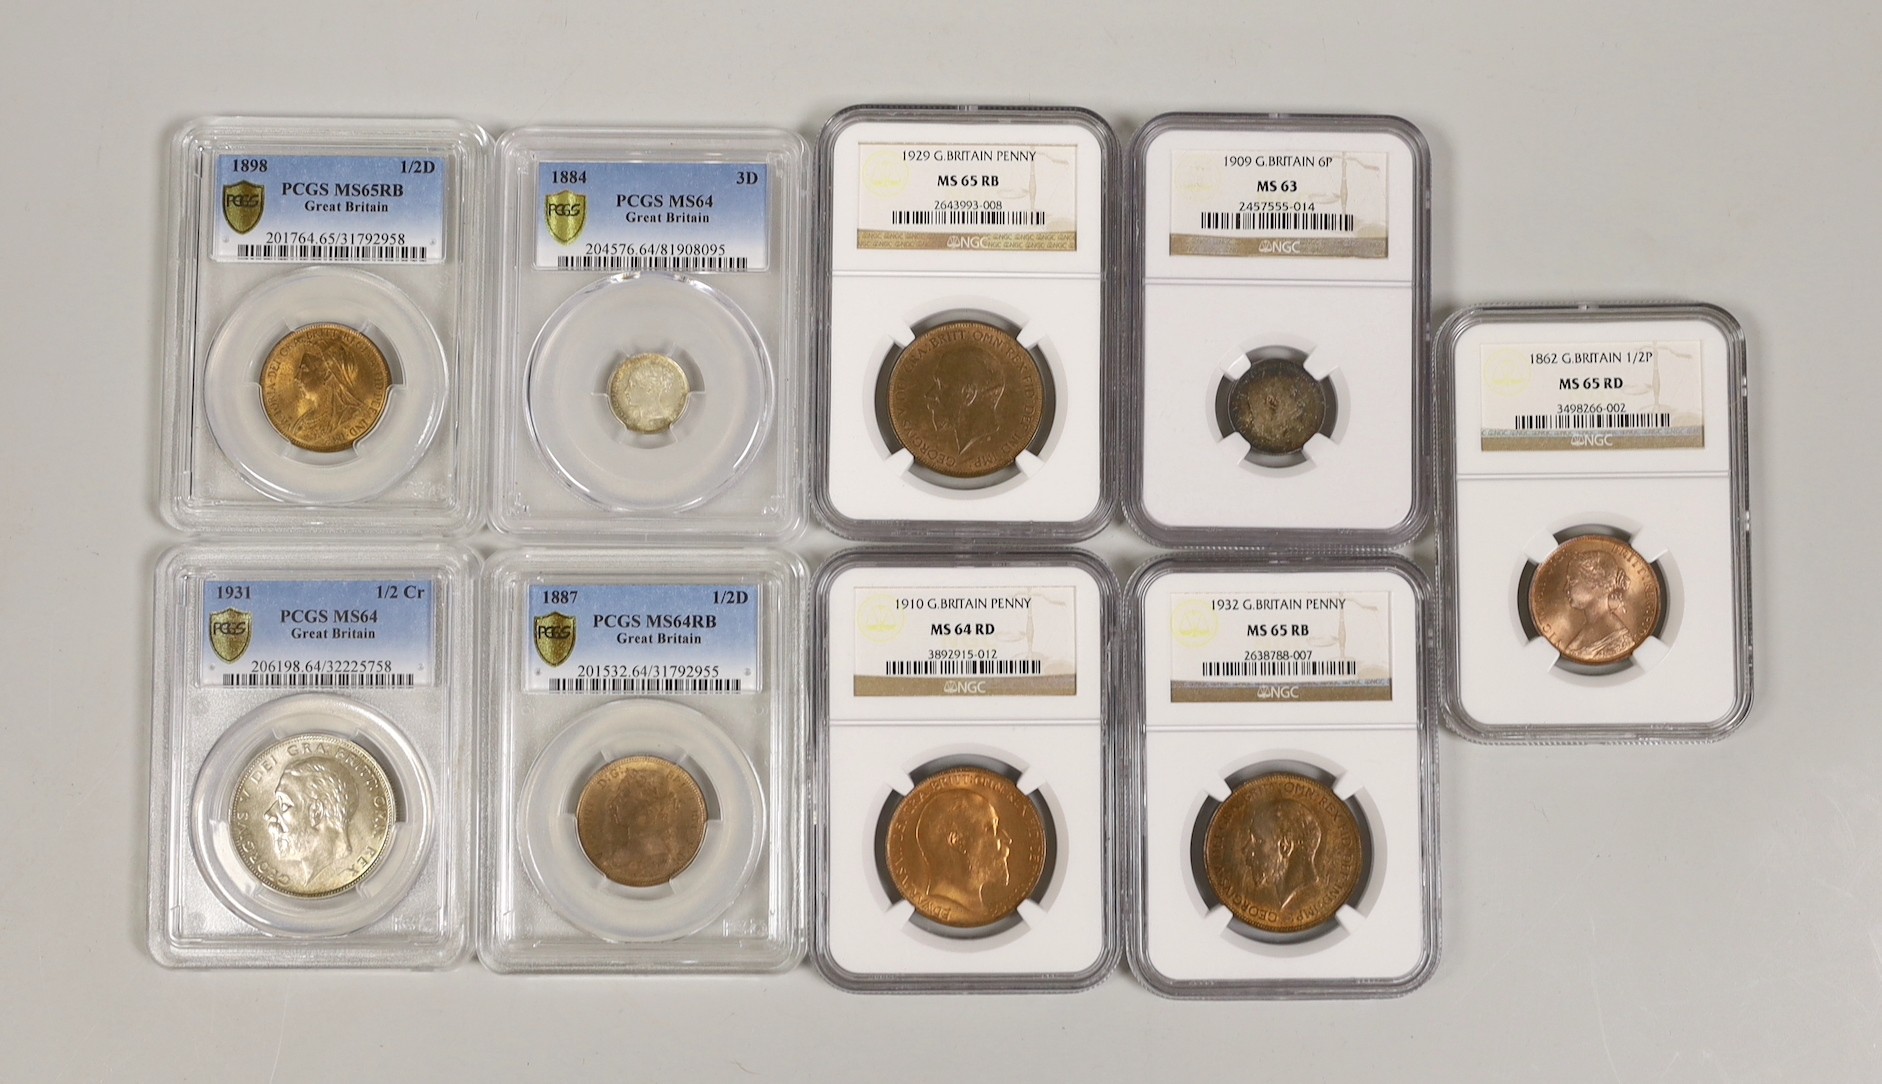 British coins, NGC and PCGS slabbed and graded - Victoria halfpenny 1862, threepence 1884, halfpenny 1887 and 1898, Edward VII one penny 1910, sixpence 1909, George V halfcrown 1931, one penny 1929 and 1932 (9)          